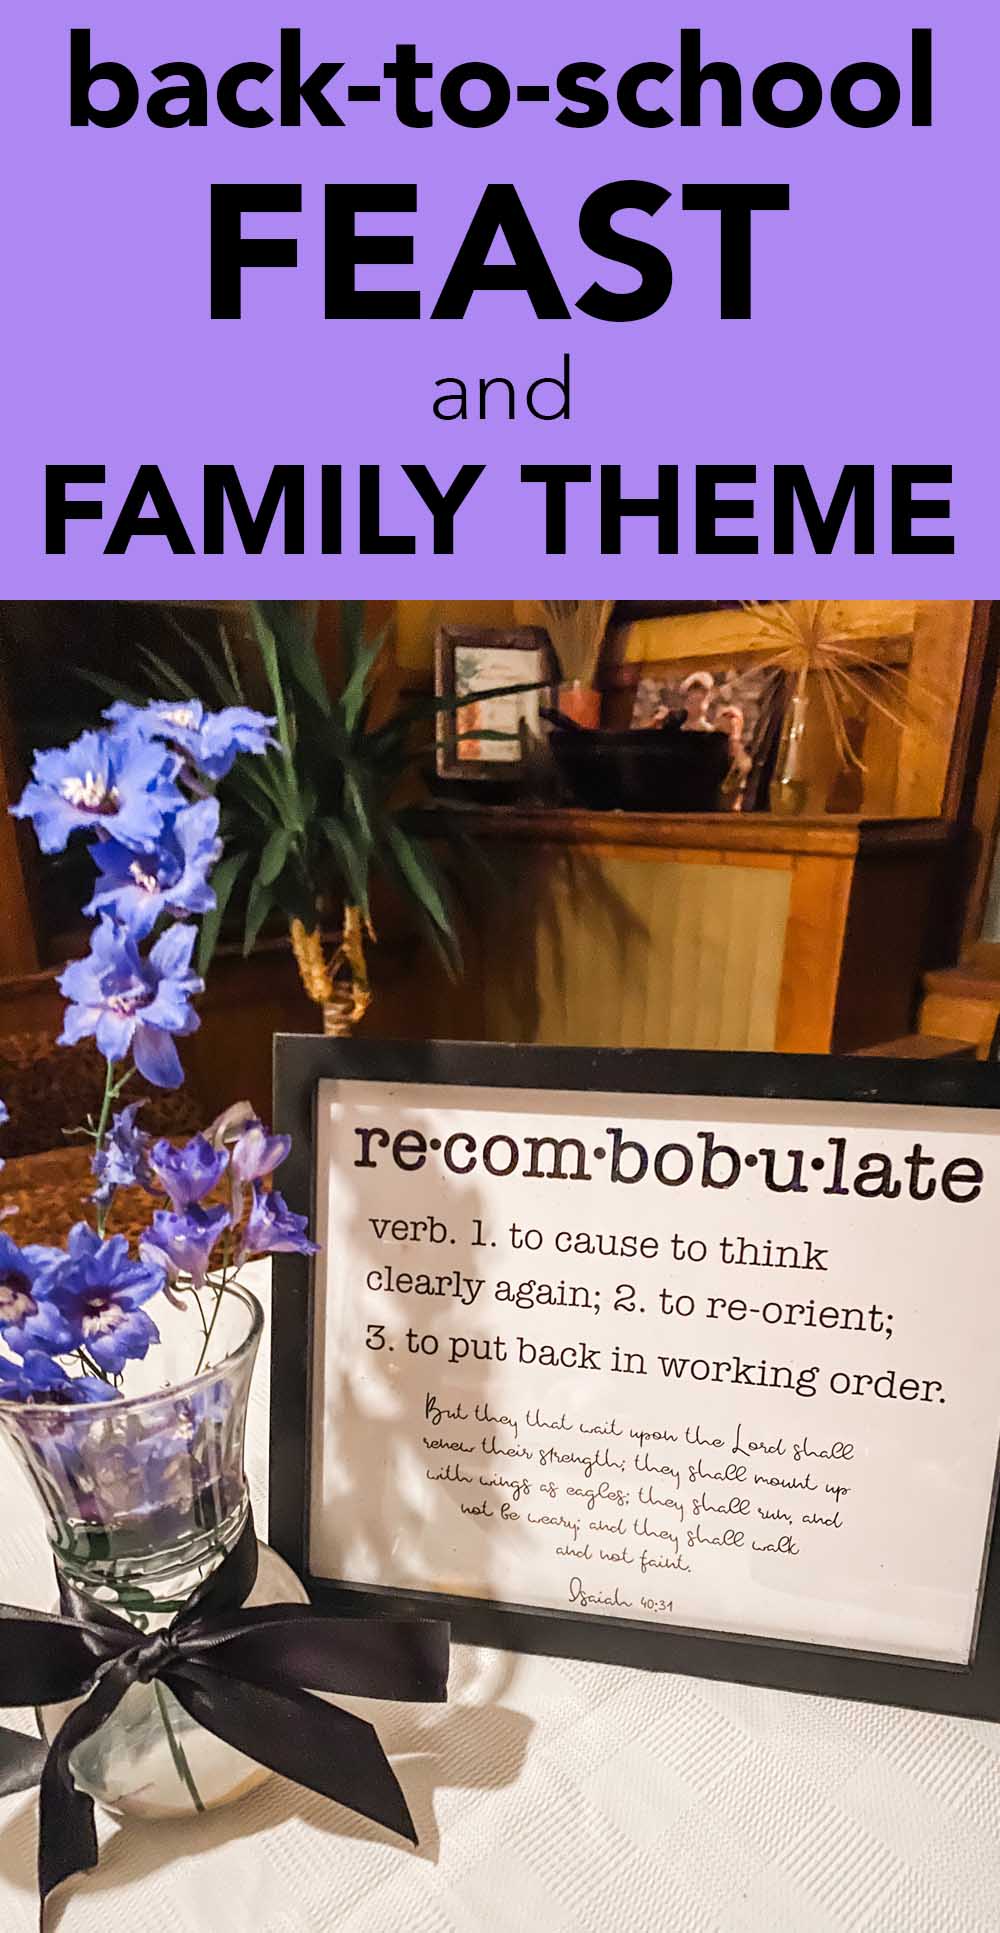 A back to school feast where a new family theme is introduced each year is our favorite tradition. 2020 theme was recombobulate. Download a free printable. via @lara_neves